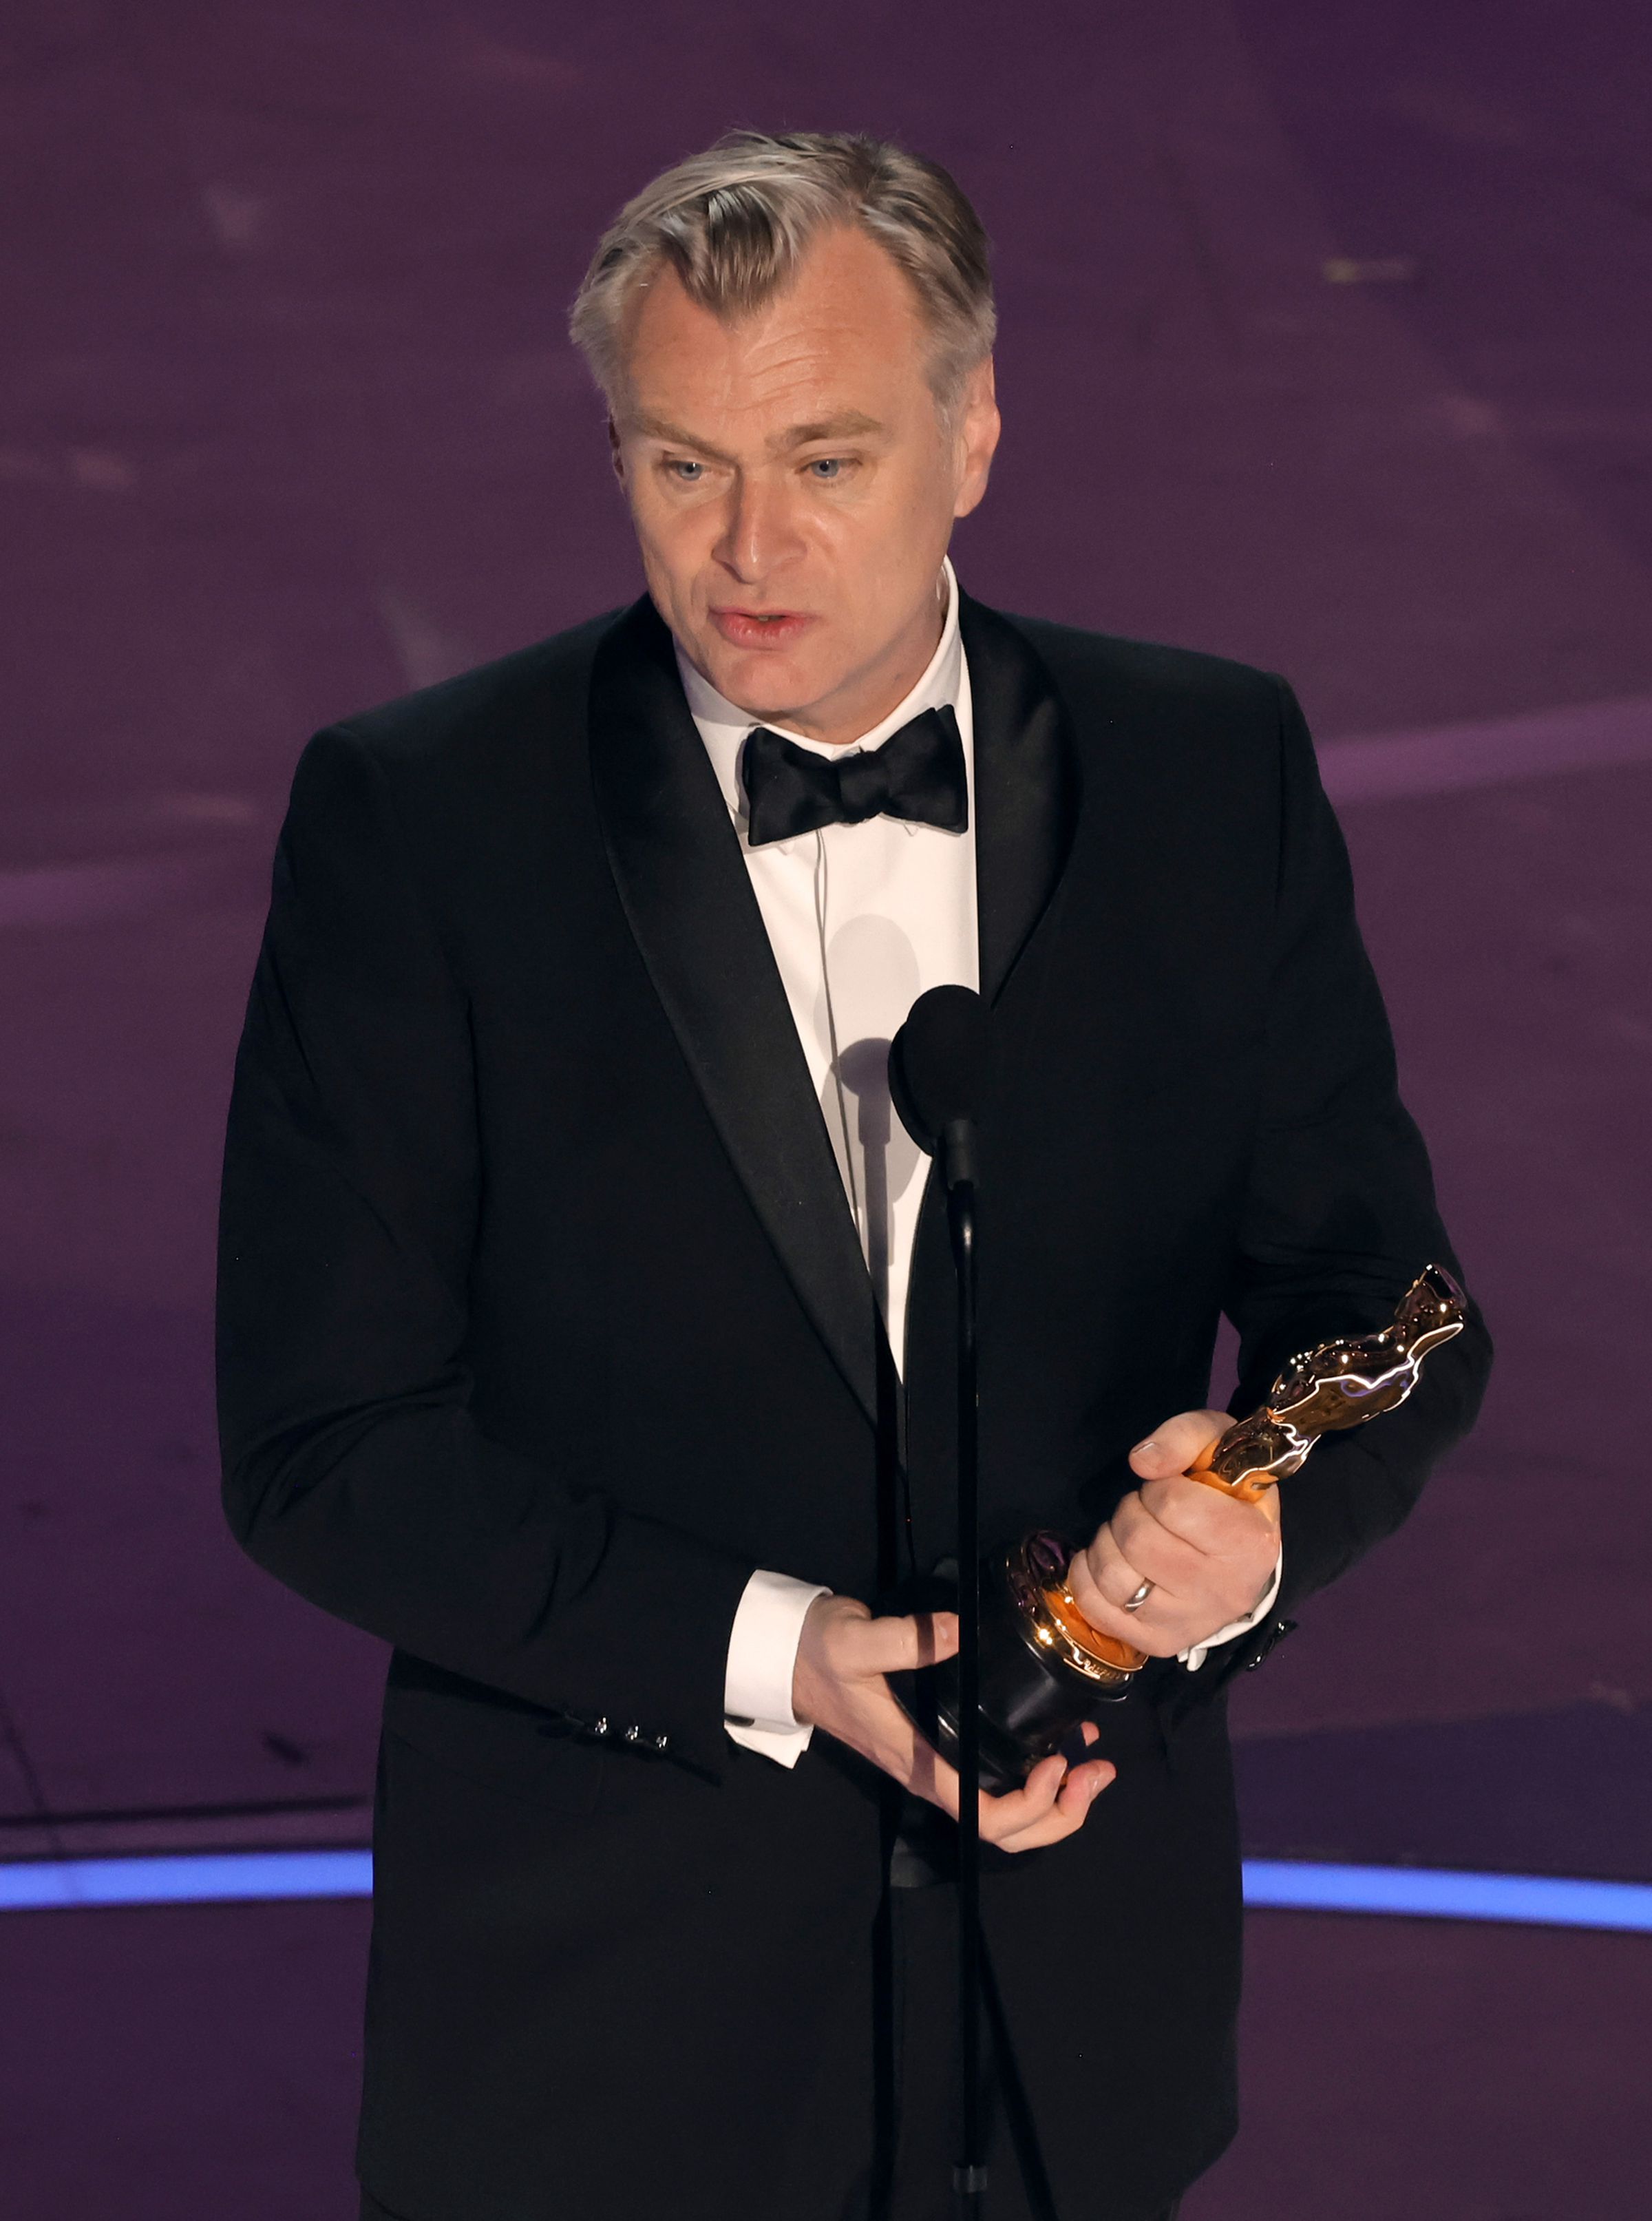 HOLLYWOOD, CALIFORNIA - MARCH 10: Christopher Nolan accepts the Best Director award for “Oppenheimer” onstage during the 96th Annual Academy Awards at Dolby Theatre on March 10, 2024 in Hollywood, California.